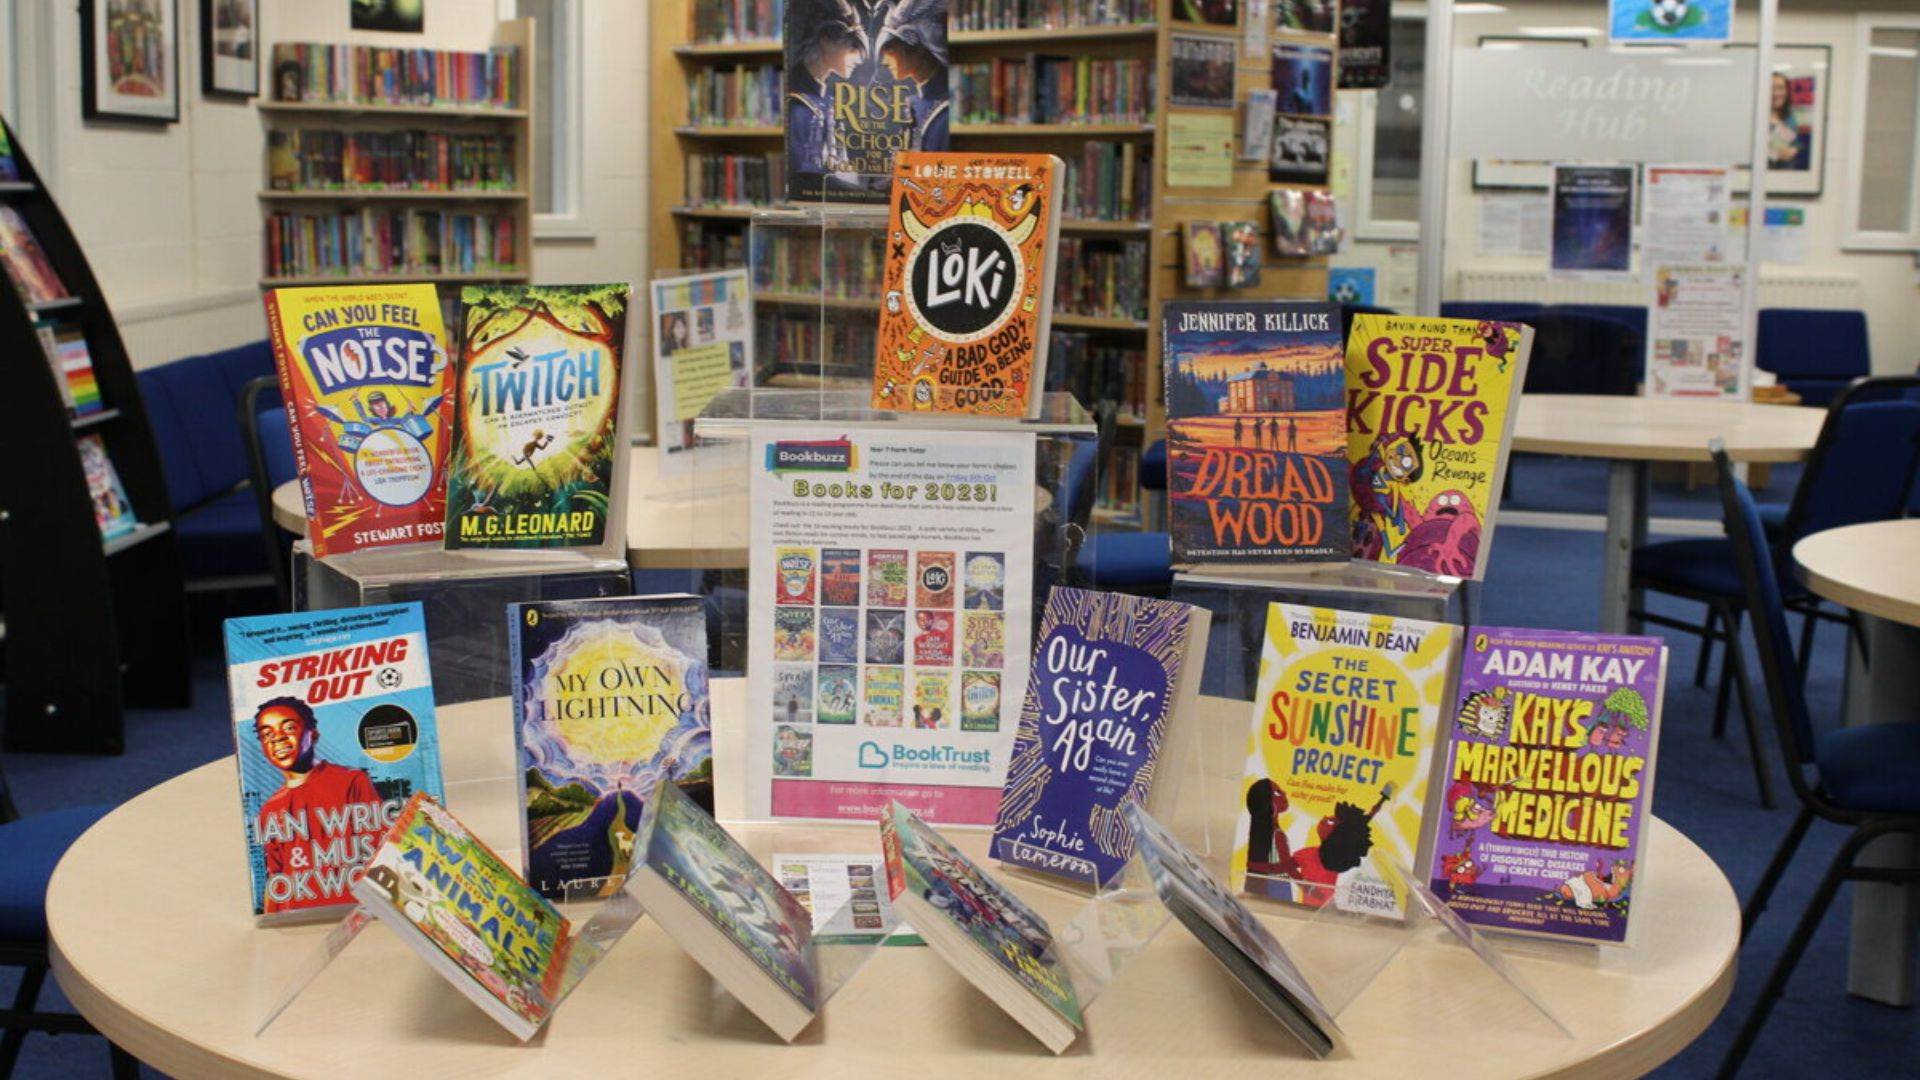 With thanks to Great Sankey High School for sharing their 2023 Bookbuzz display